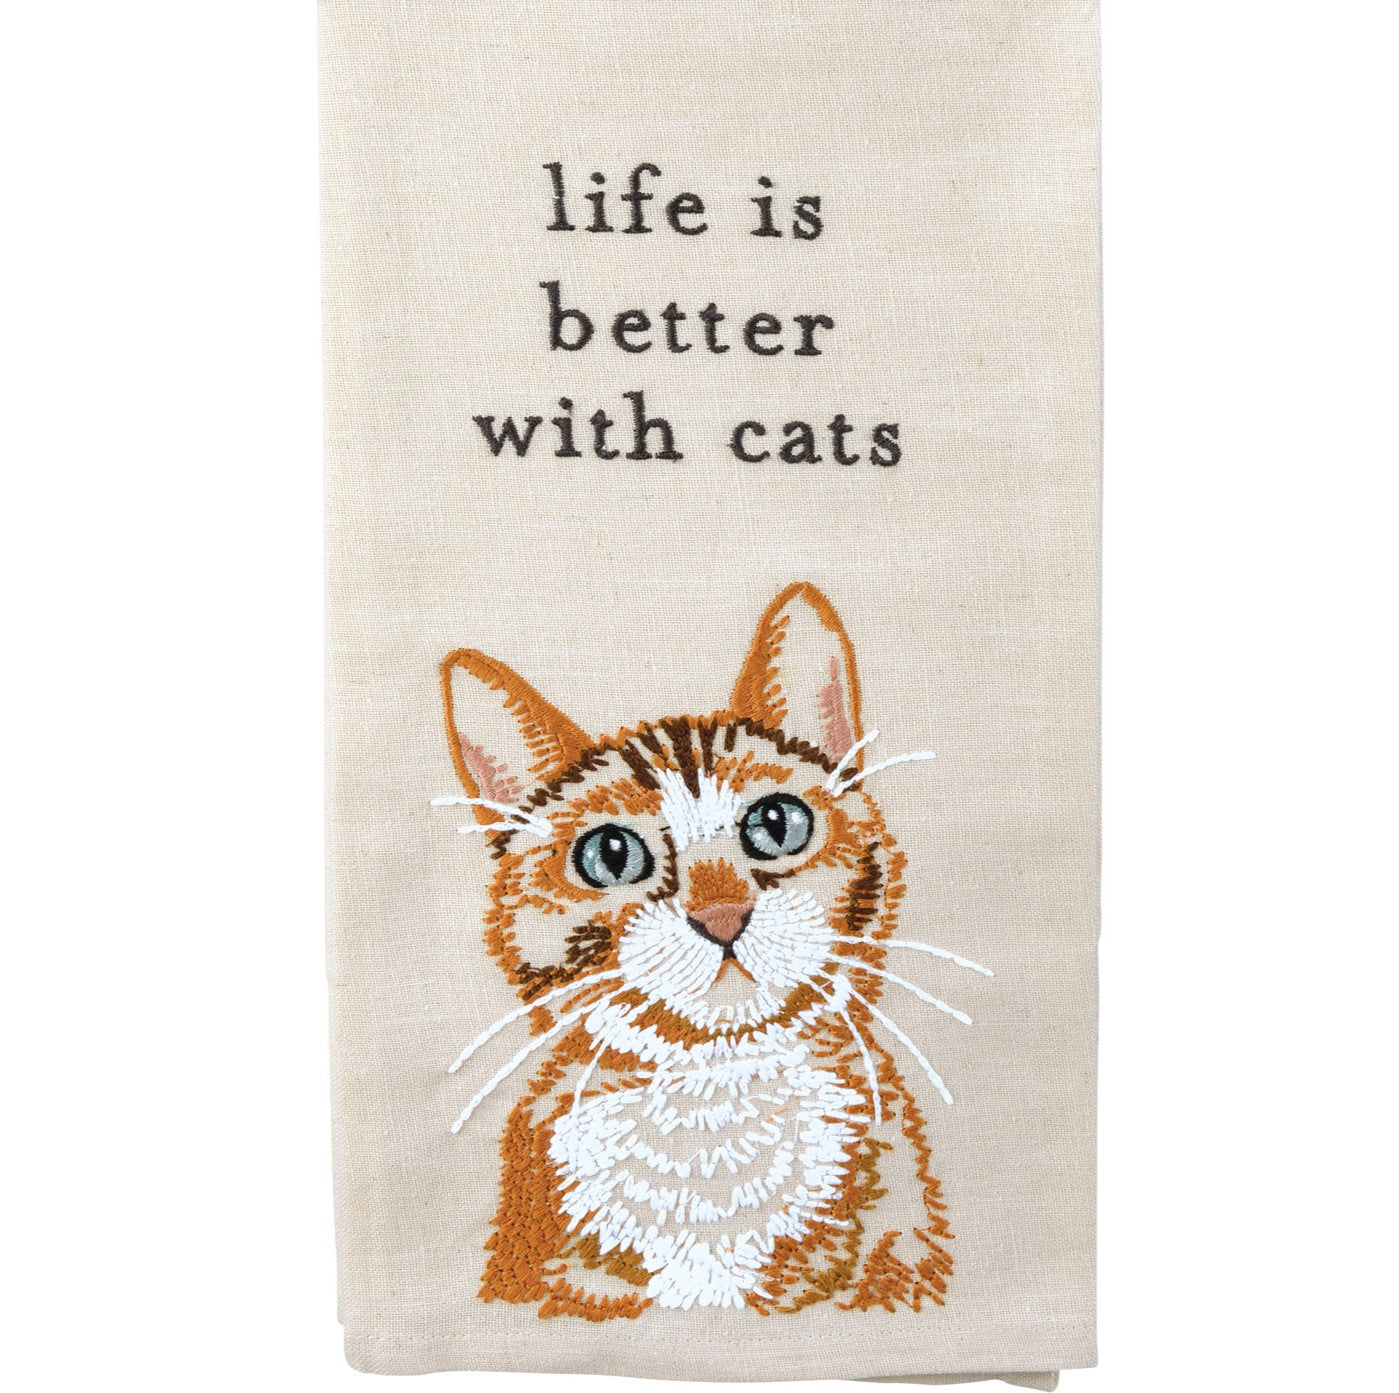 "Life Is Better With Cats" - Cat themed Kitchen Towel